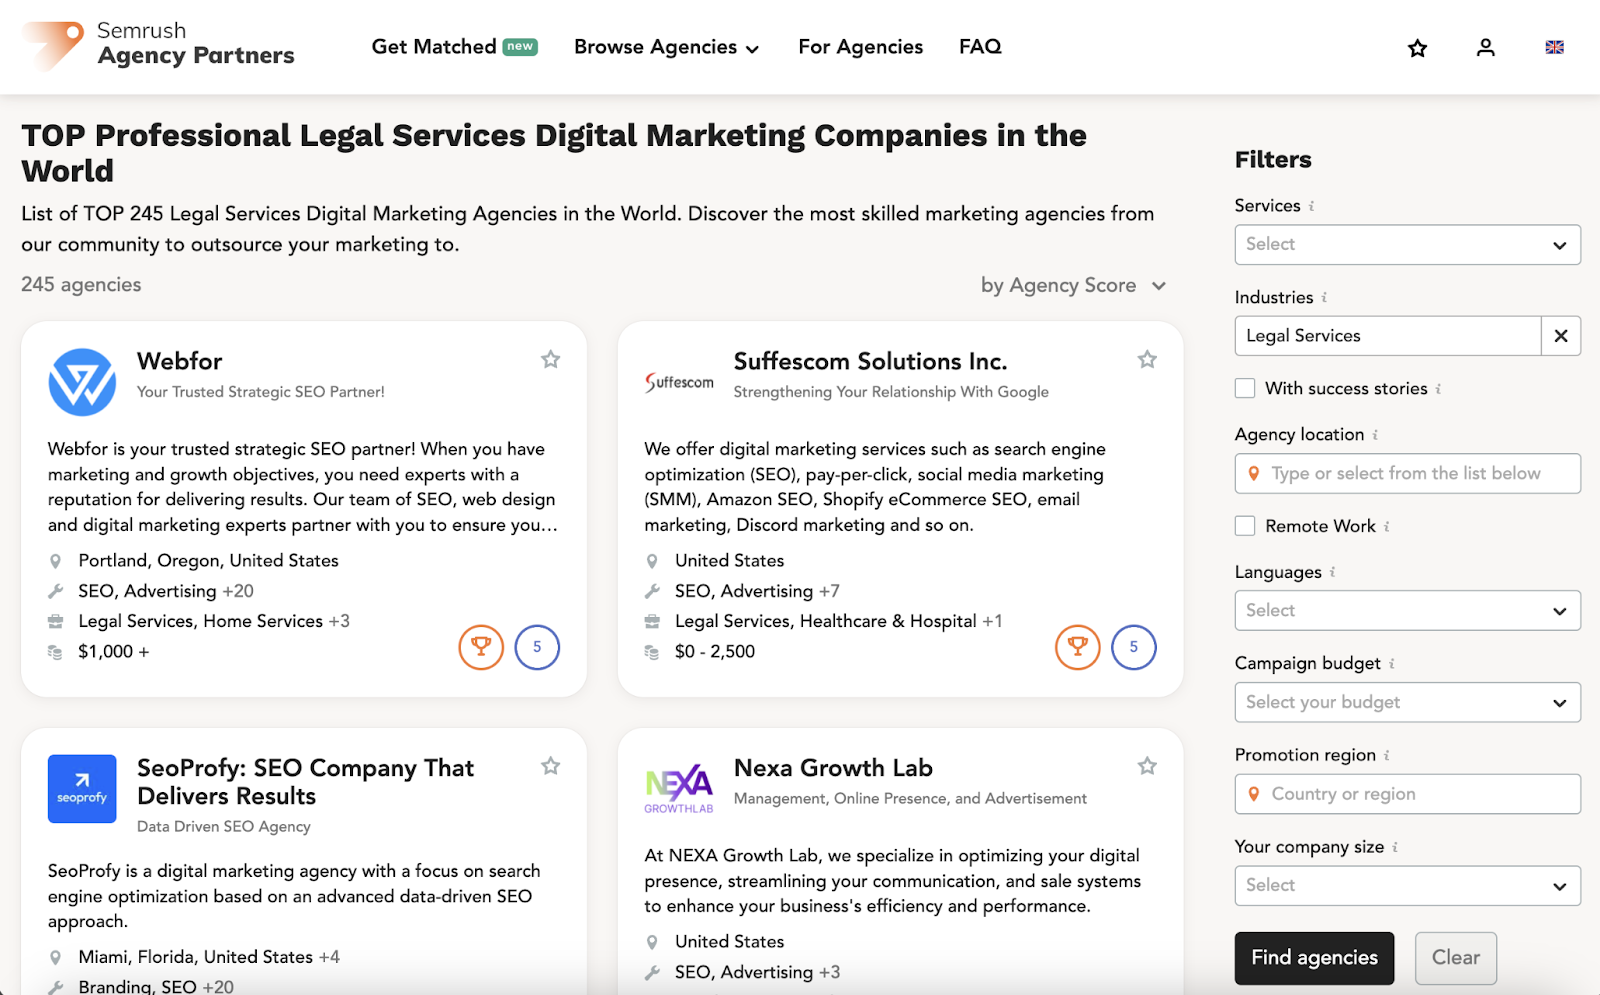 Semrush Agency Partners' leafage   showing "TOP Professional Legal Services Digital Marketing Companies successful  the World"